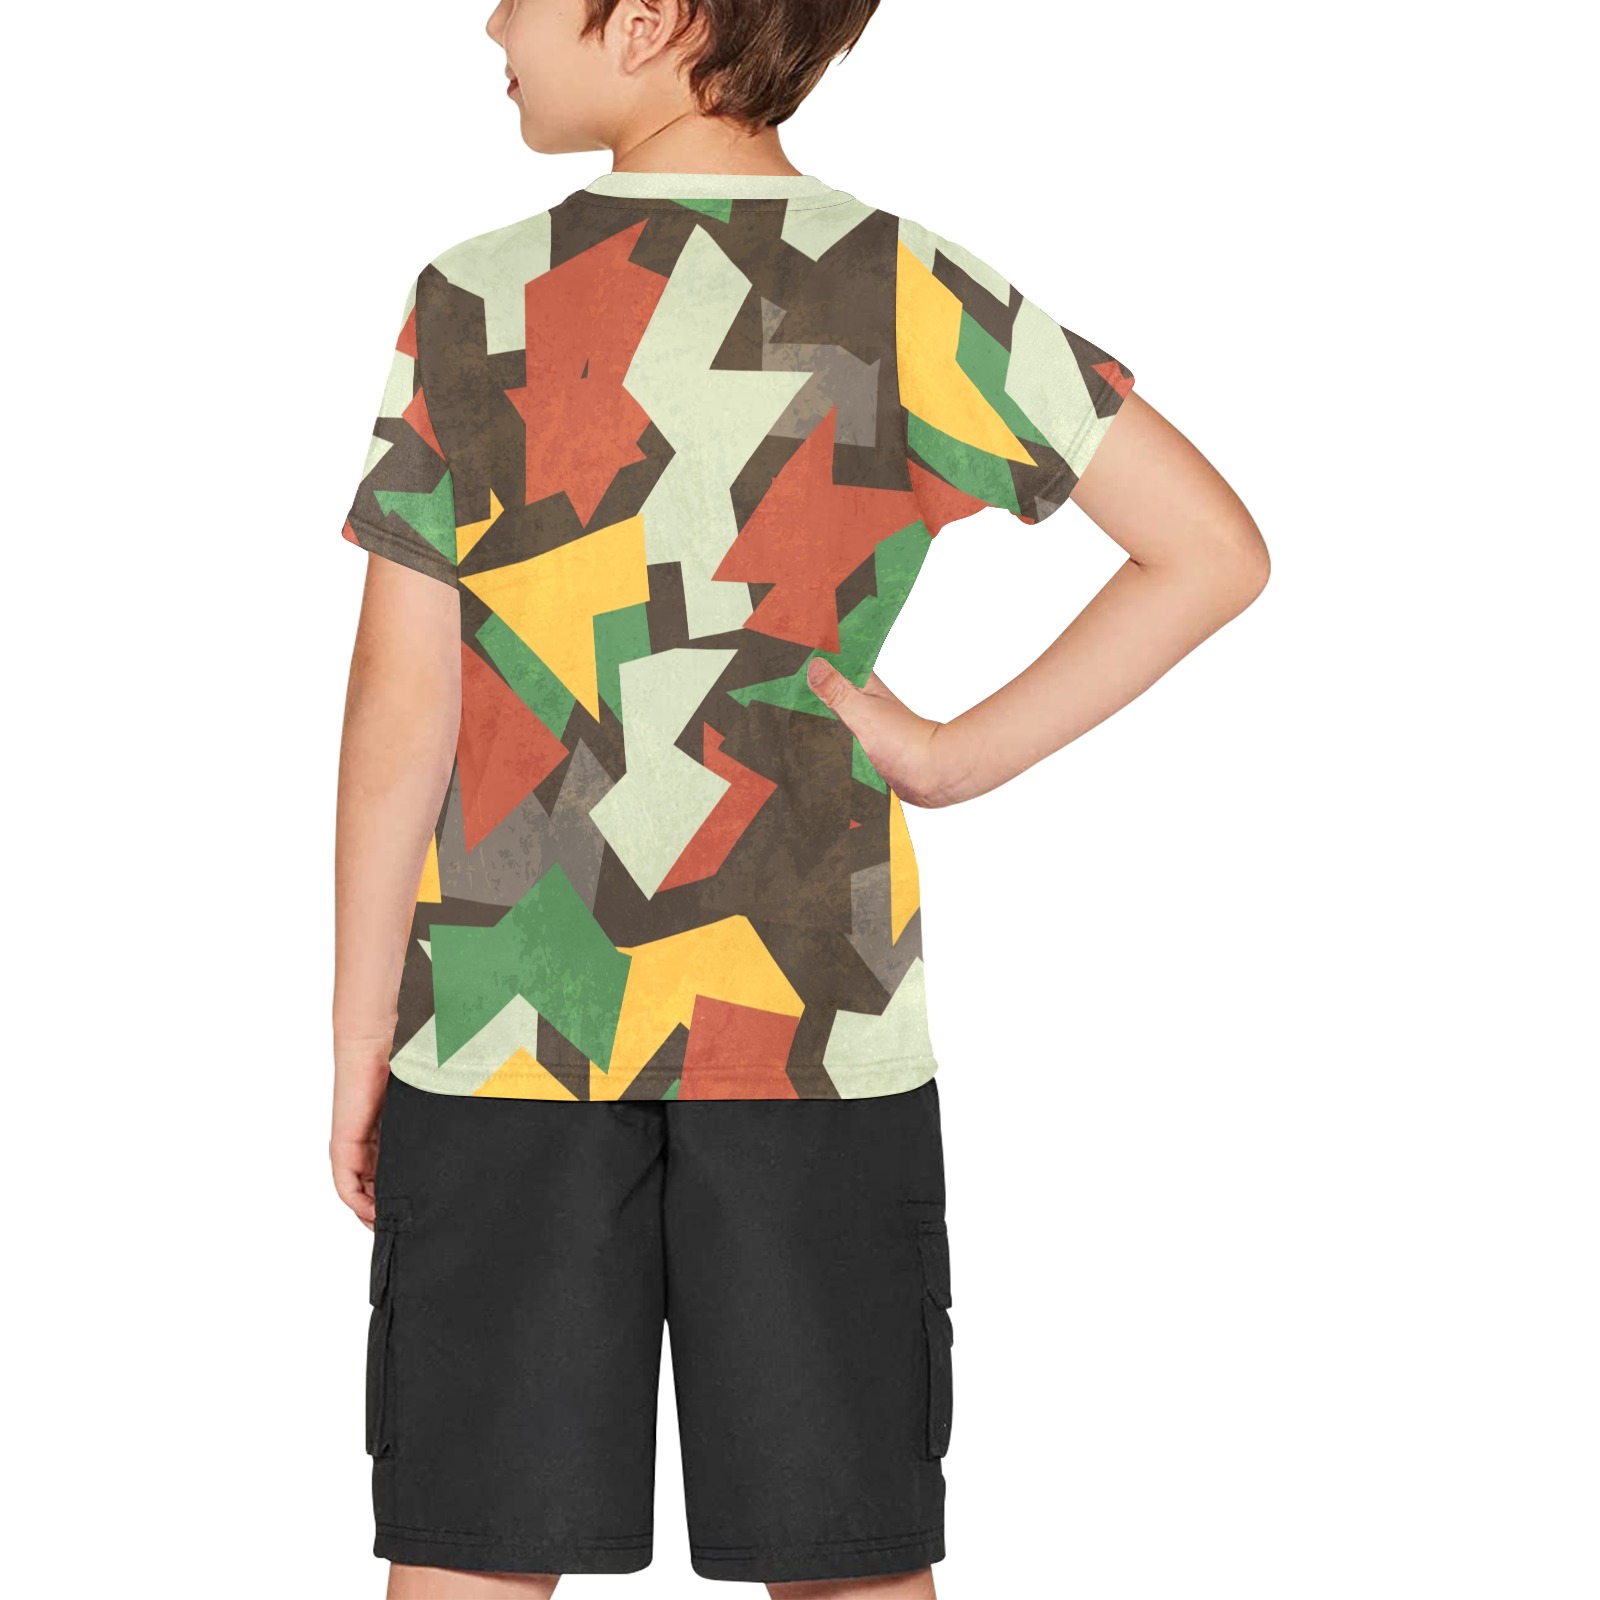 Geometric Abstract Shapes Big Boys' All Over Print Crew Neck T-Shirt (Model T40-2)